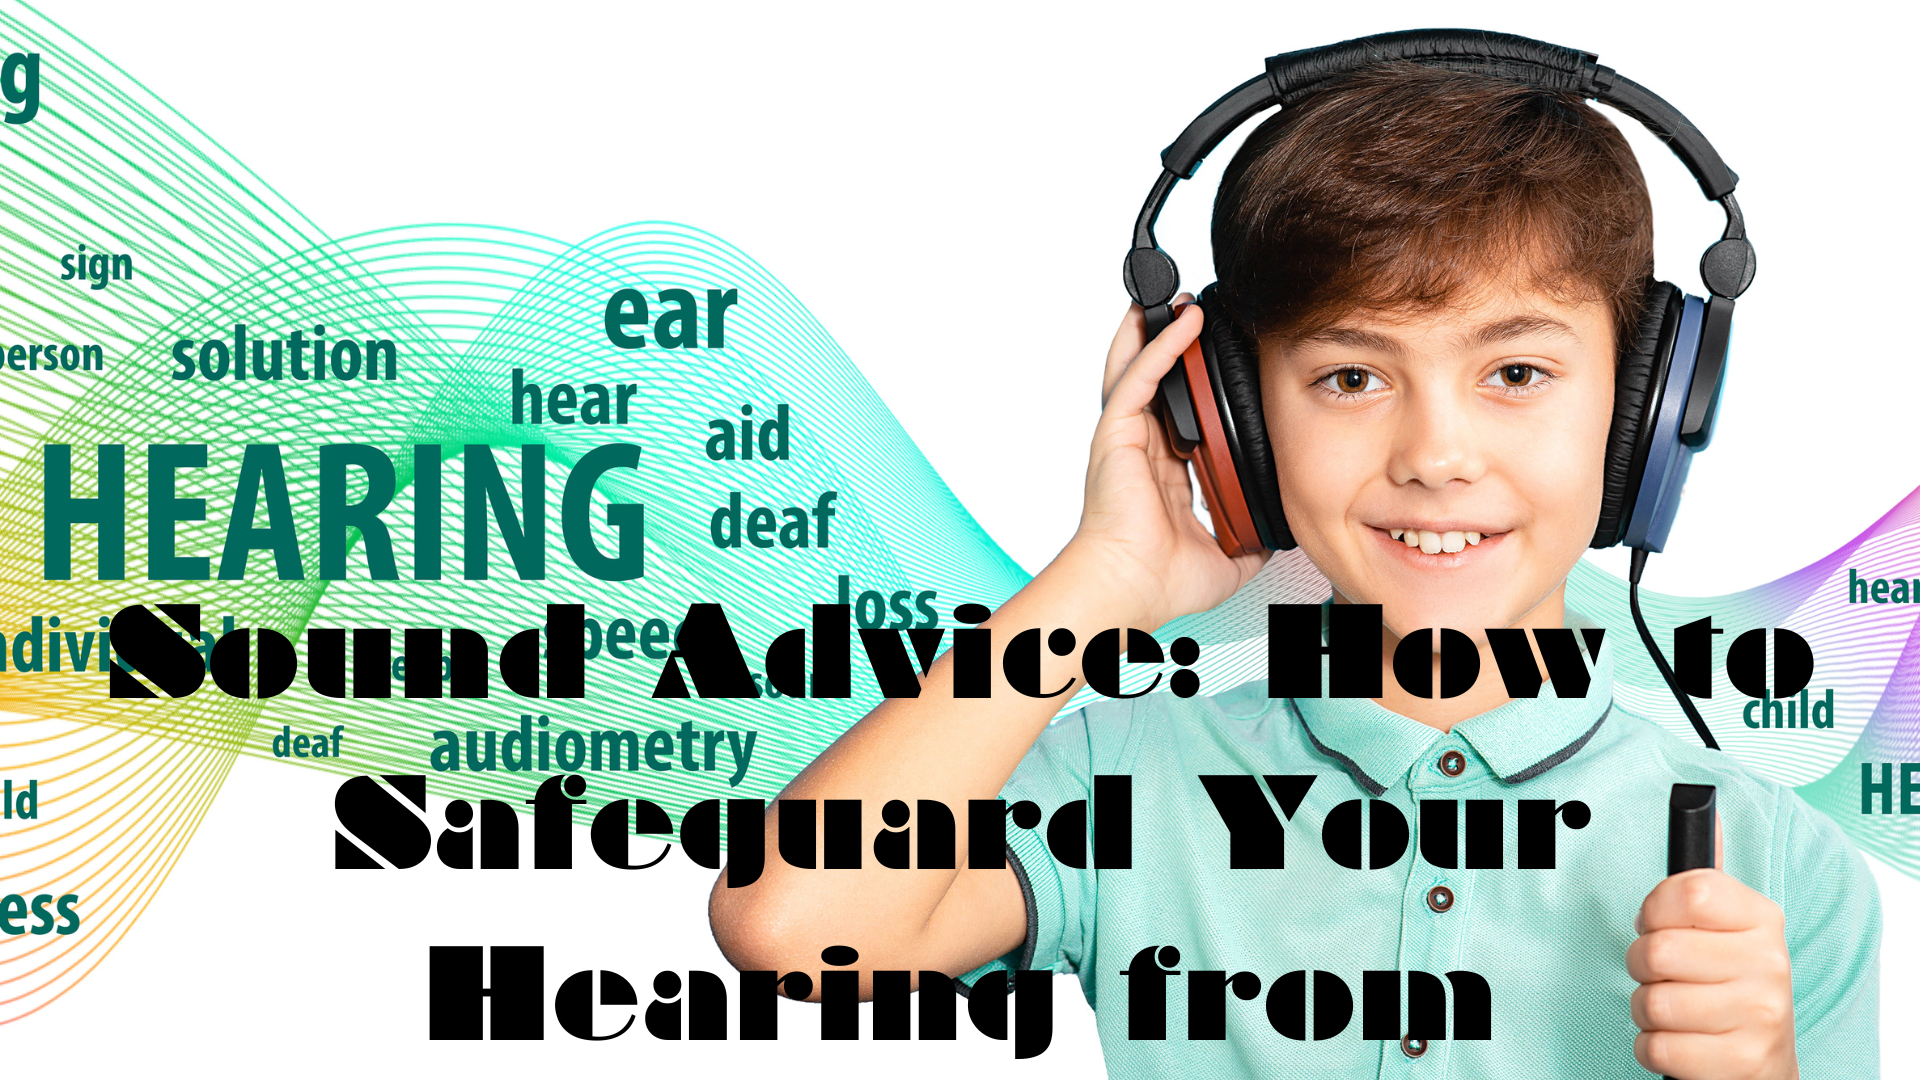 Sound Advice How to Safeguard Your Hearing from Headphones 1